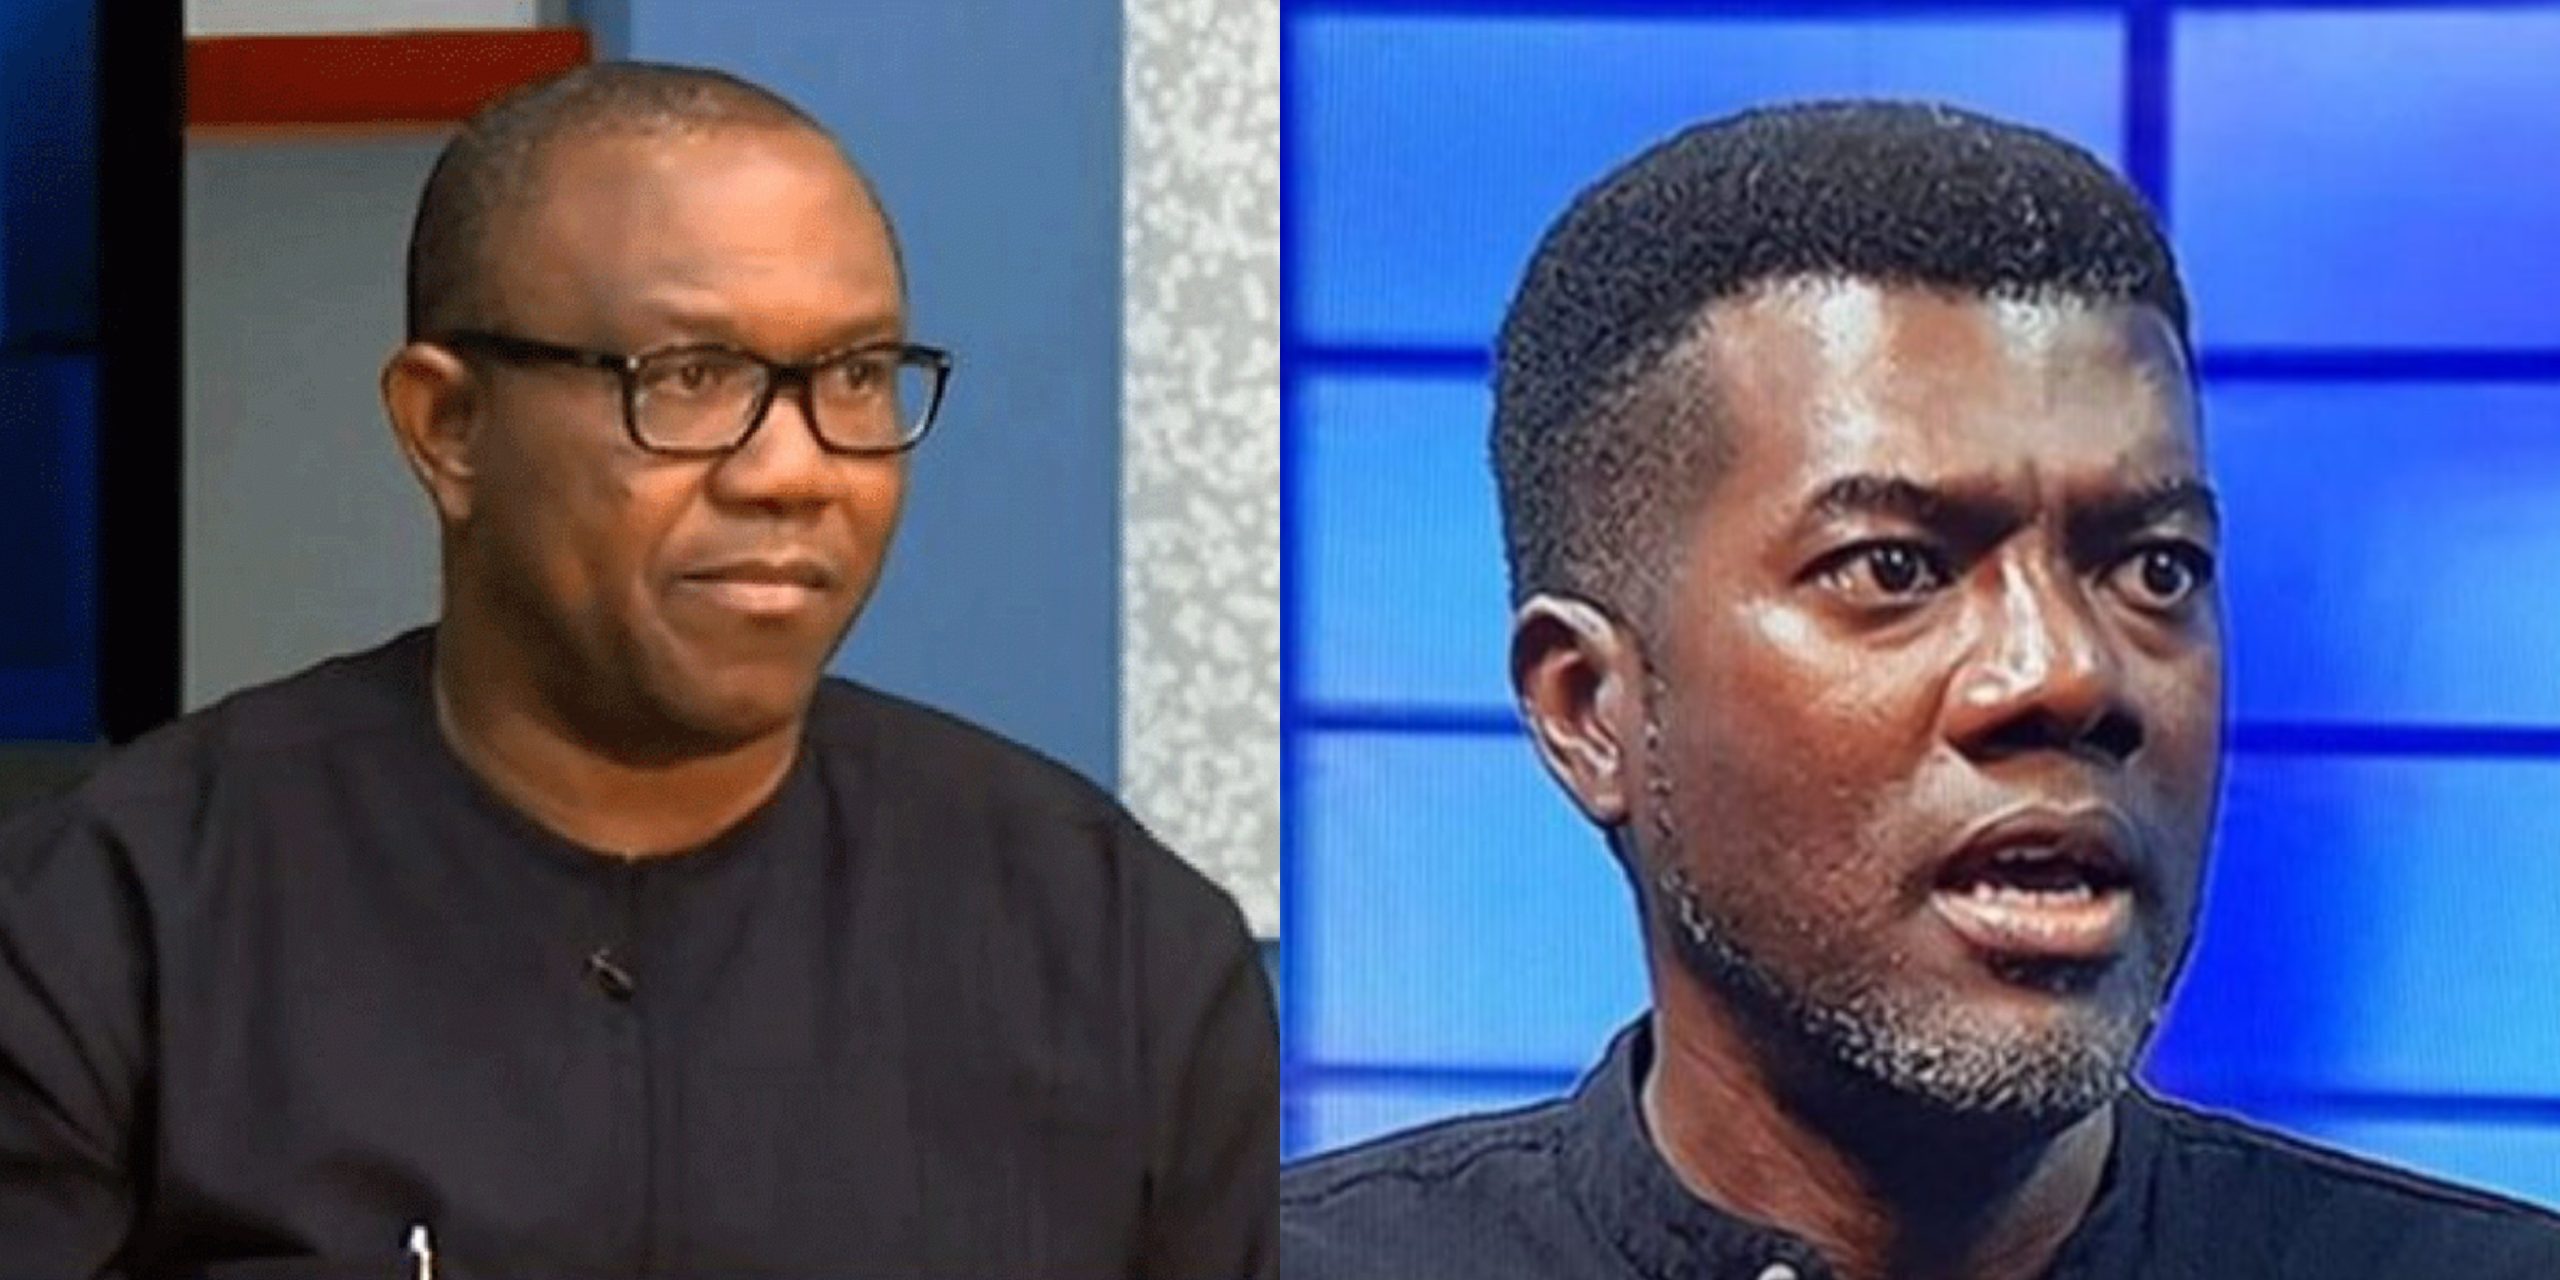 Why I didn’t build any school as Anambra governor – Peter Obi responds to Reno Omokri